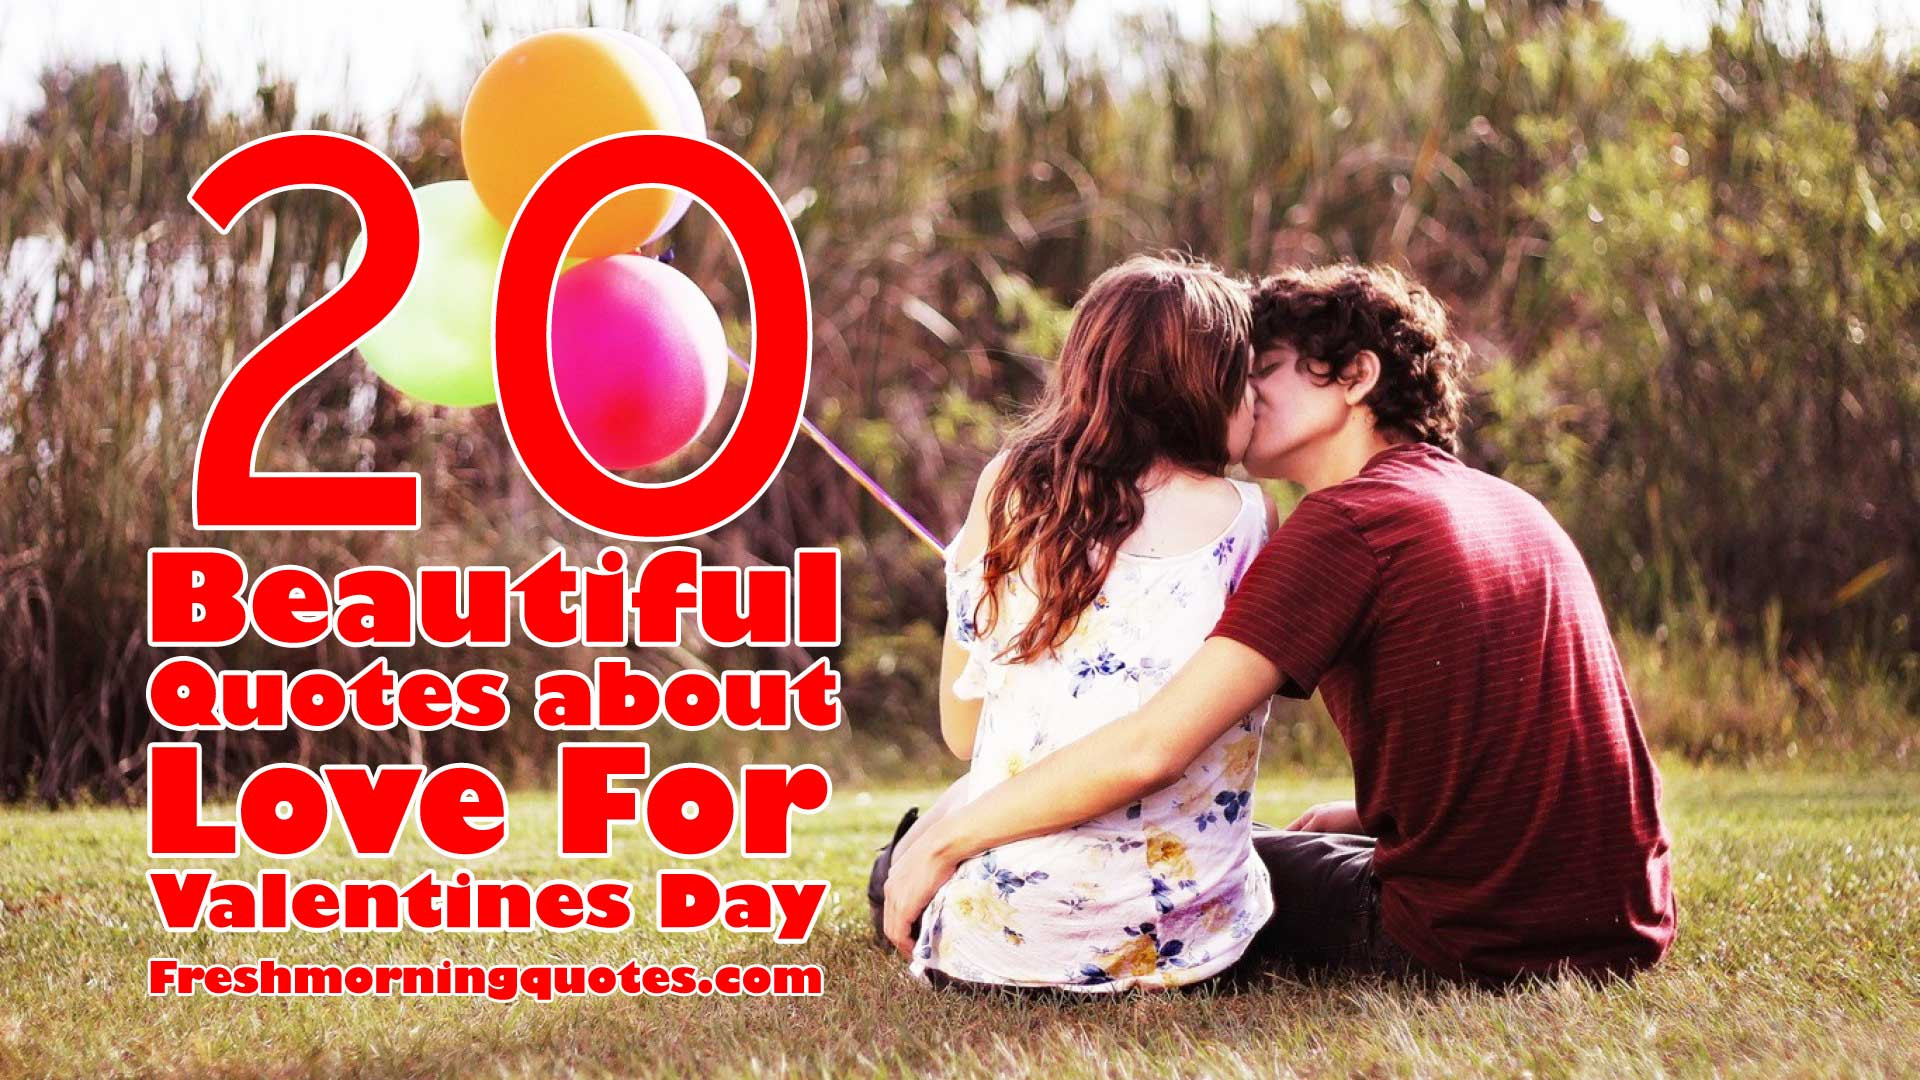 Quotes Valentines Day
 20 Beautiful Quotes about Love for Valentines Day